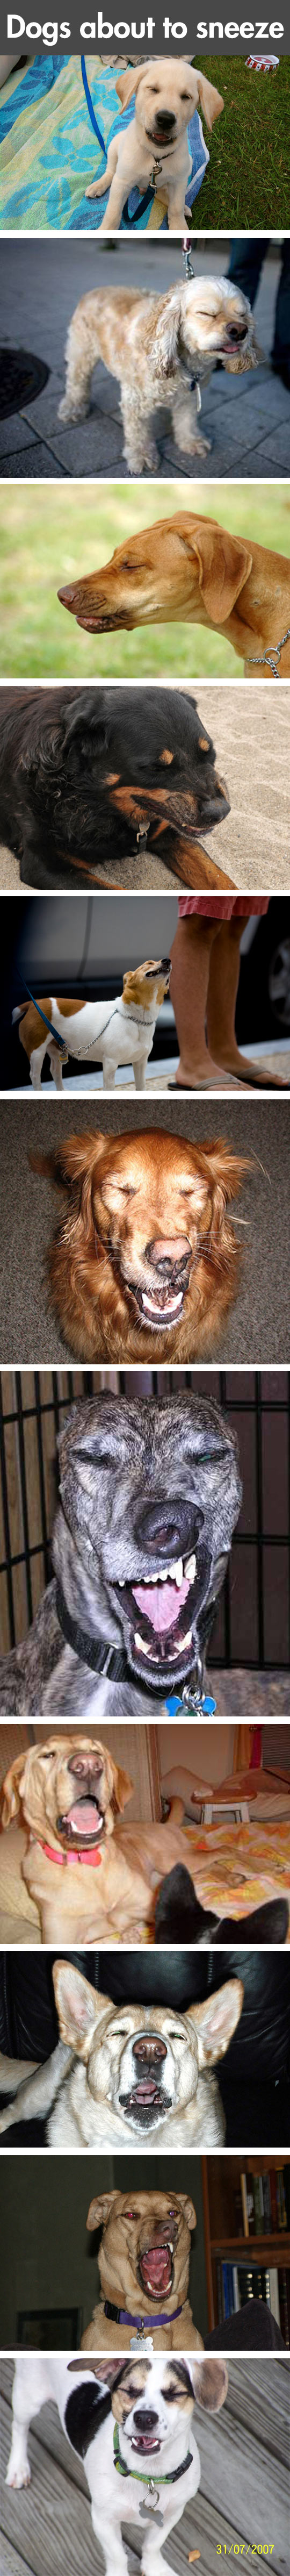 funny-dogs-sneeze-photo-cute